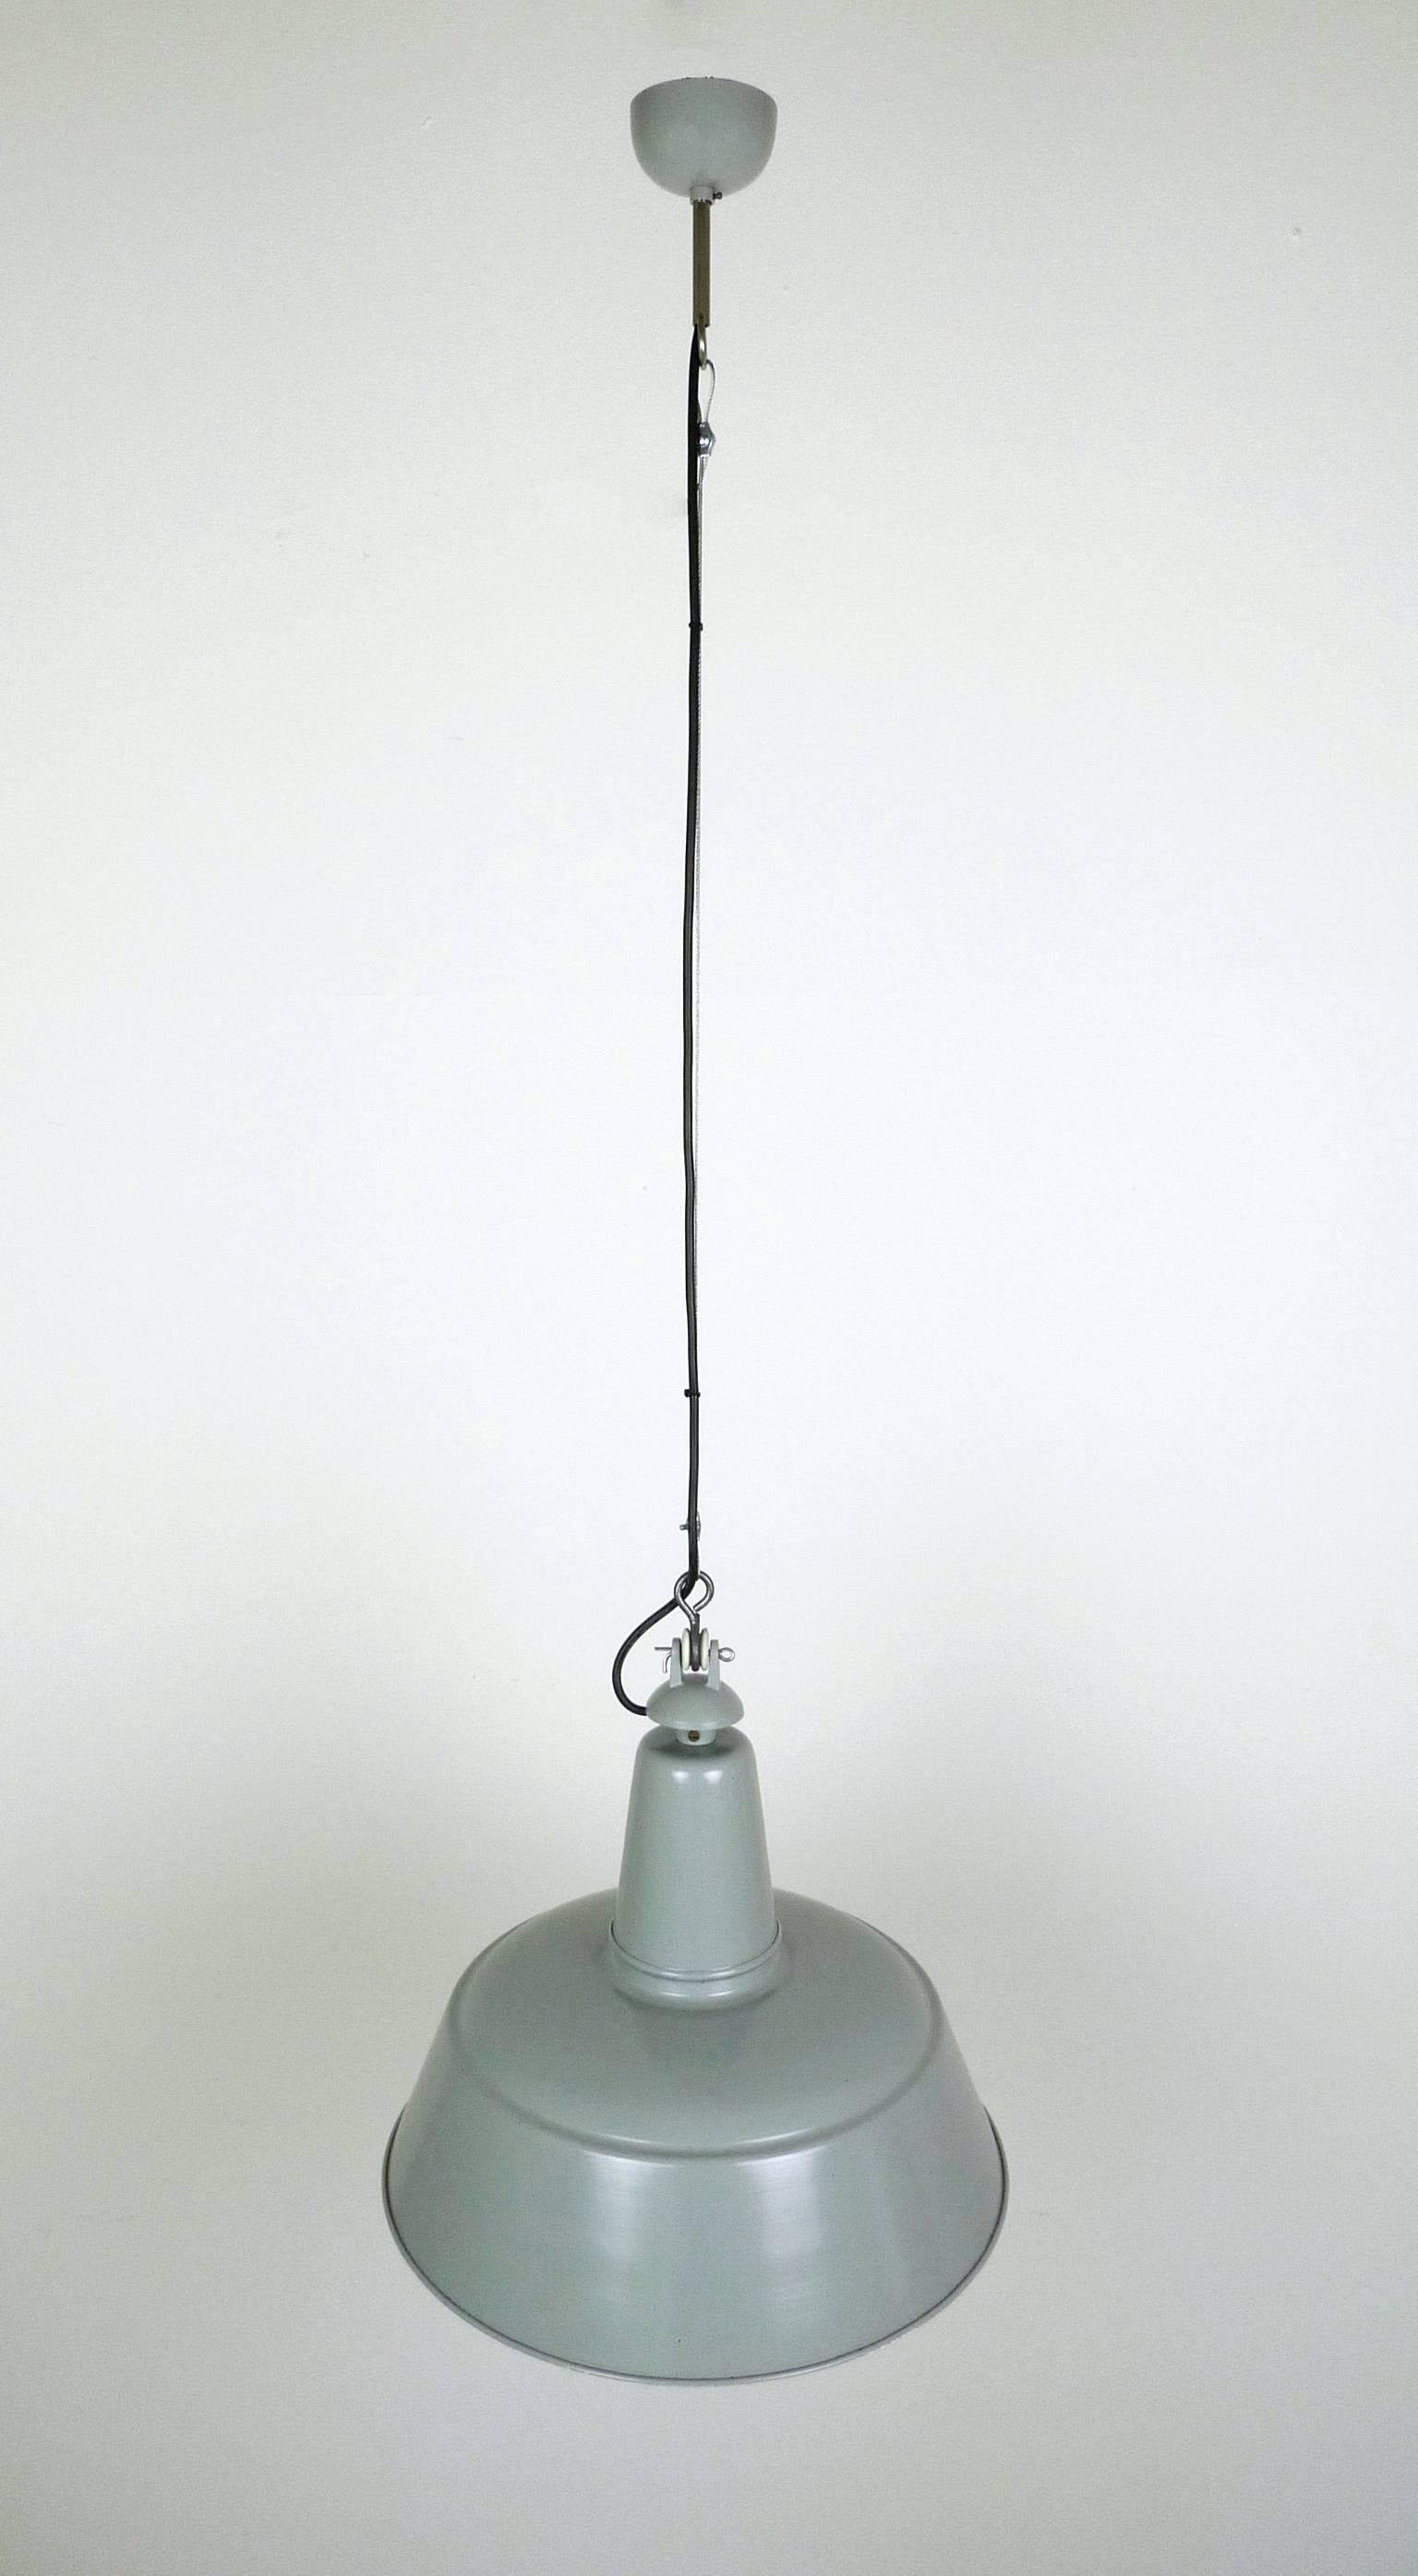 Lacquered German Light-Gray Metal Industrial Pendant from the 1950s